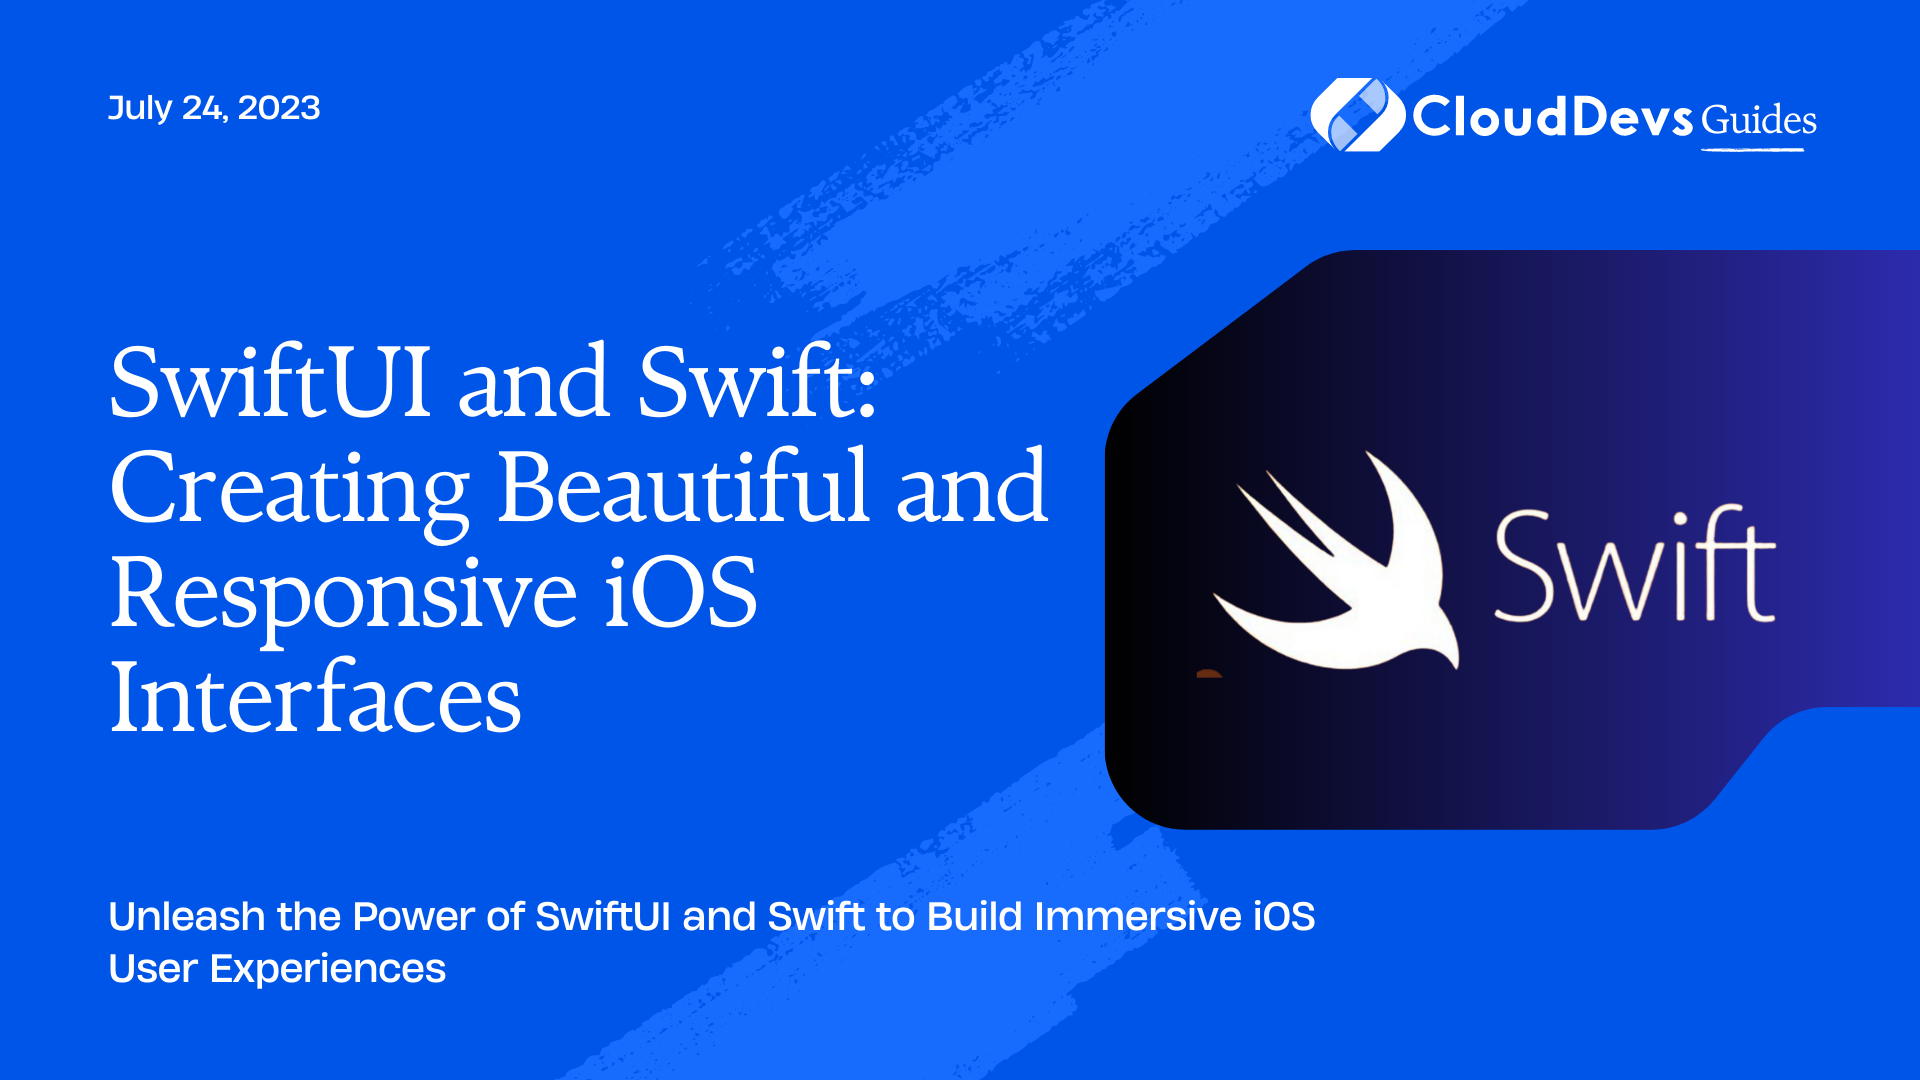 SwiftUI and Swift: Creating Beautiful and Responsive iOS Interfaces